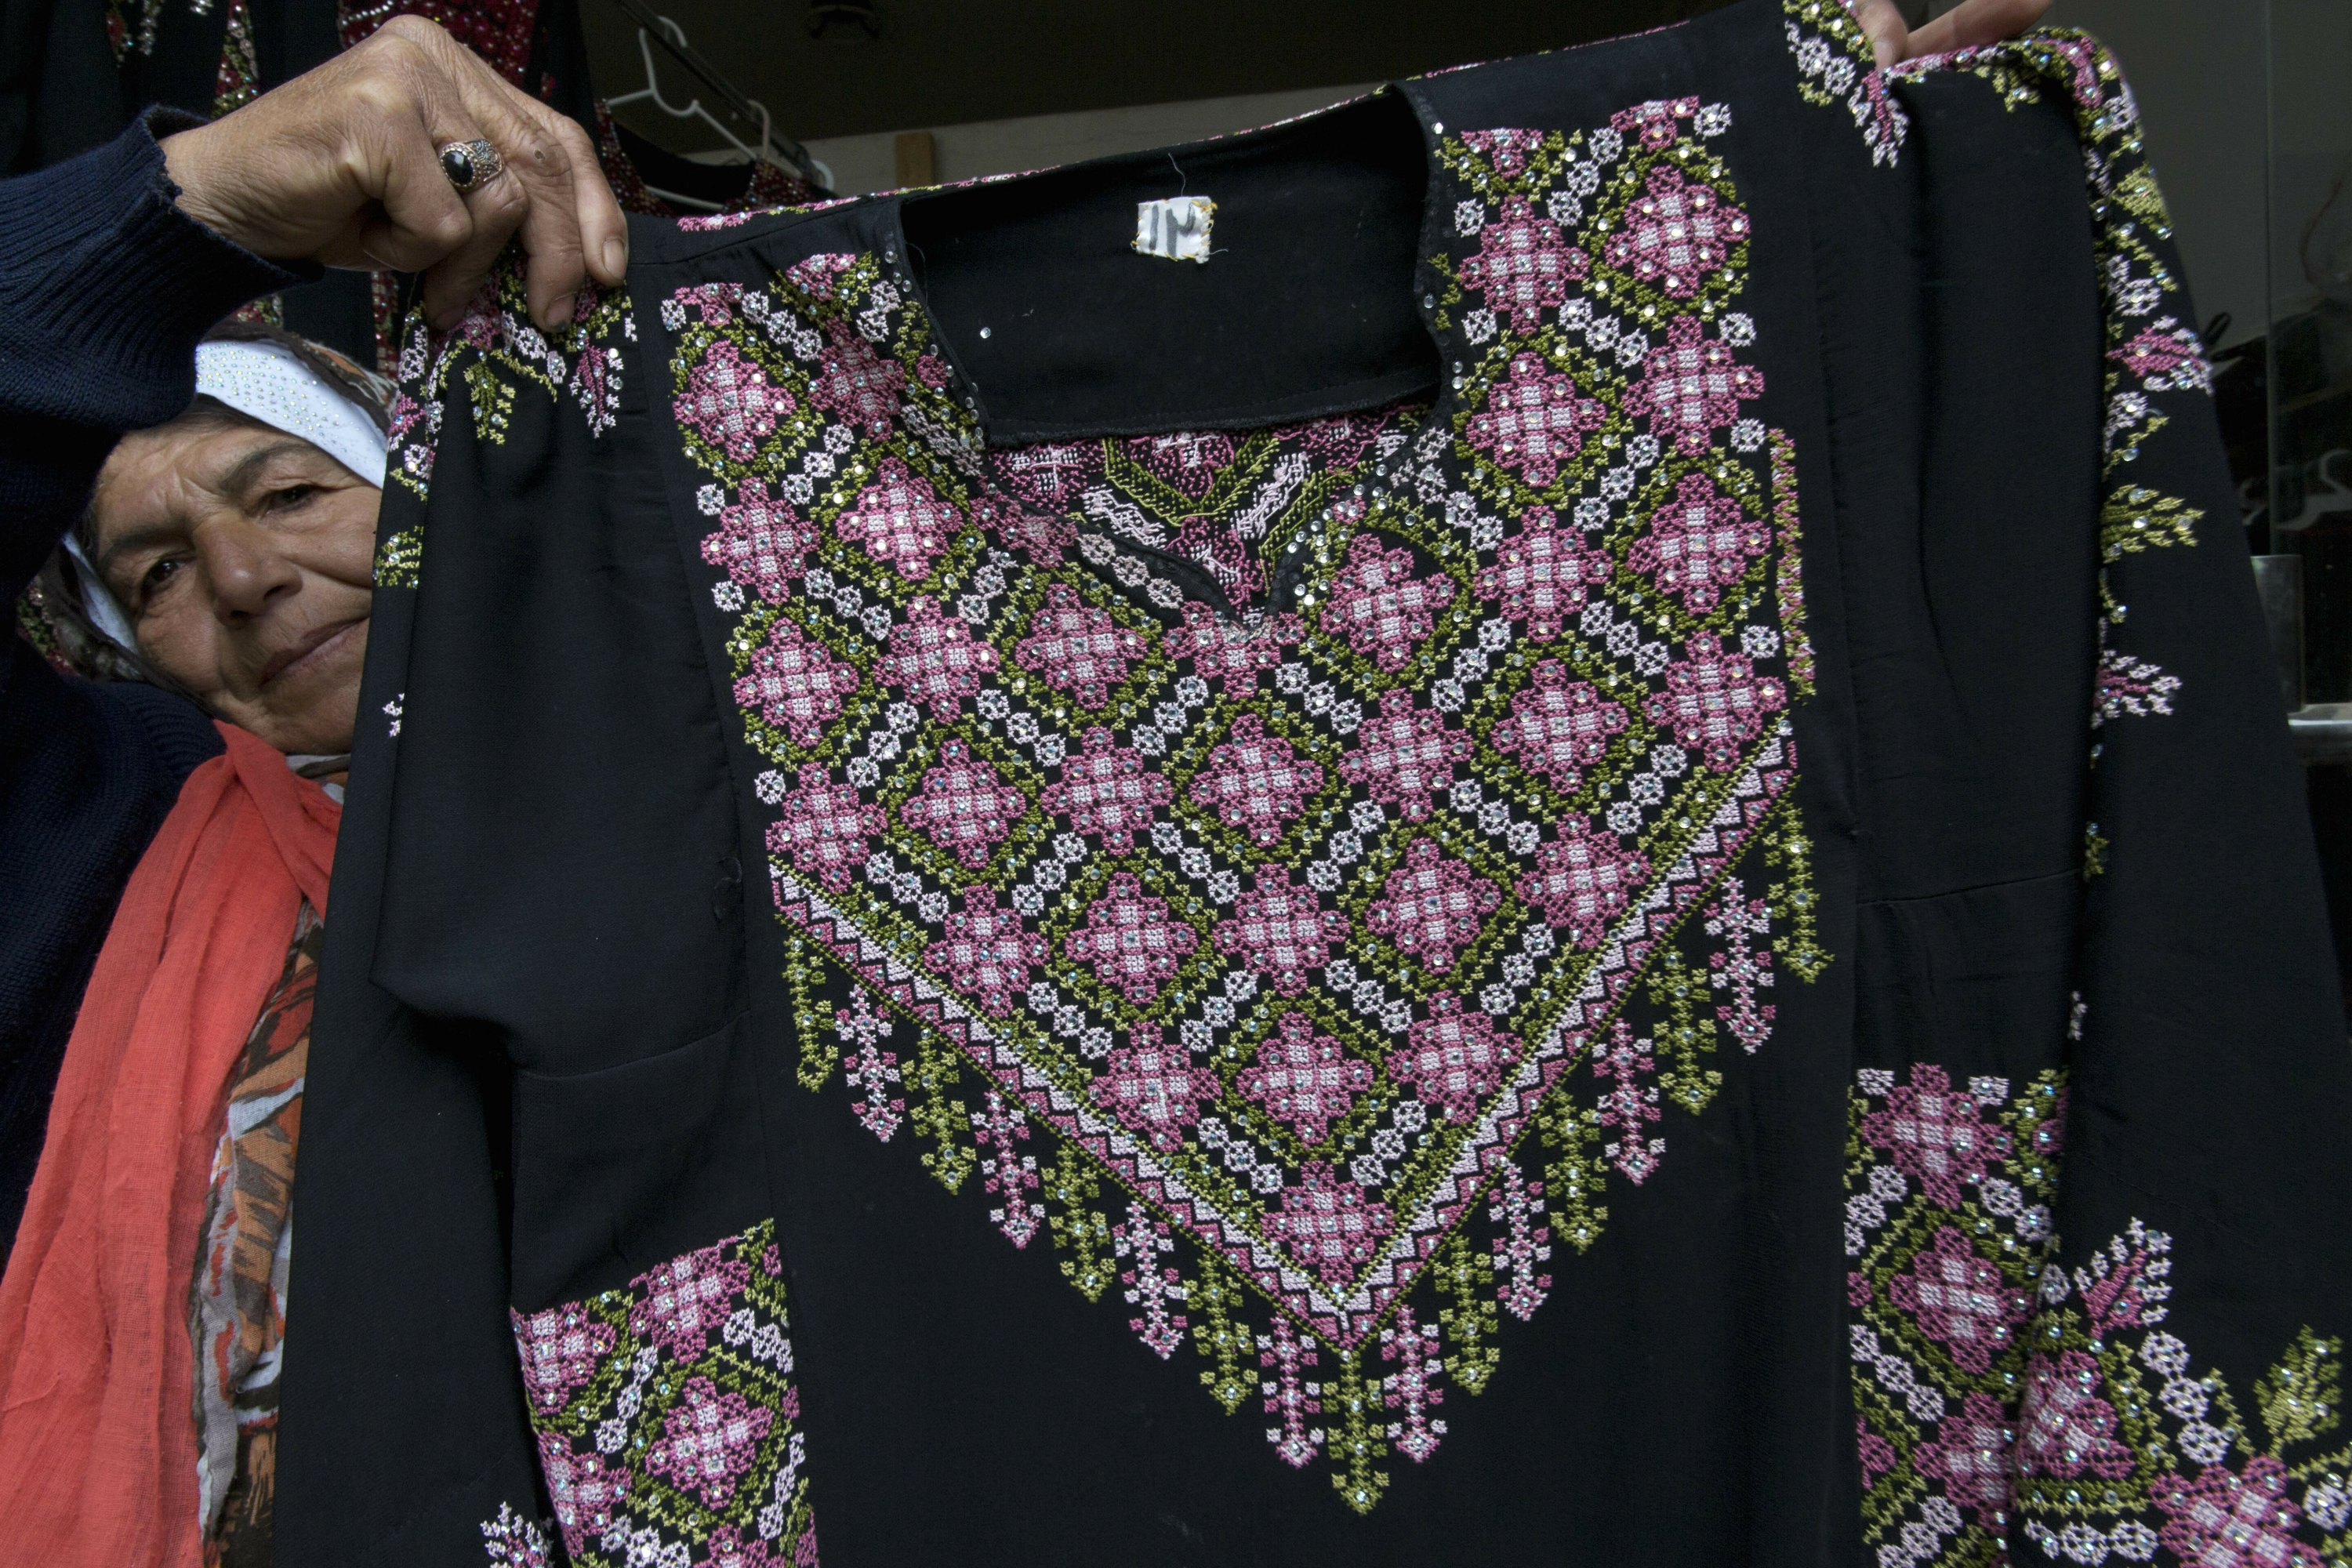 Palestinian Embroidery Patterns Iconic Palestinian Robe Fashions A New Political Symbol